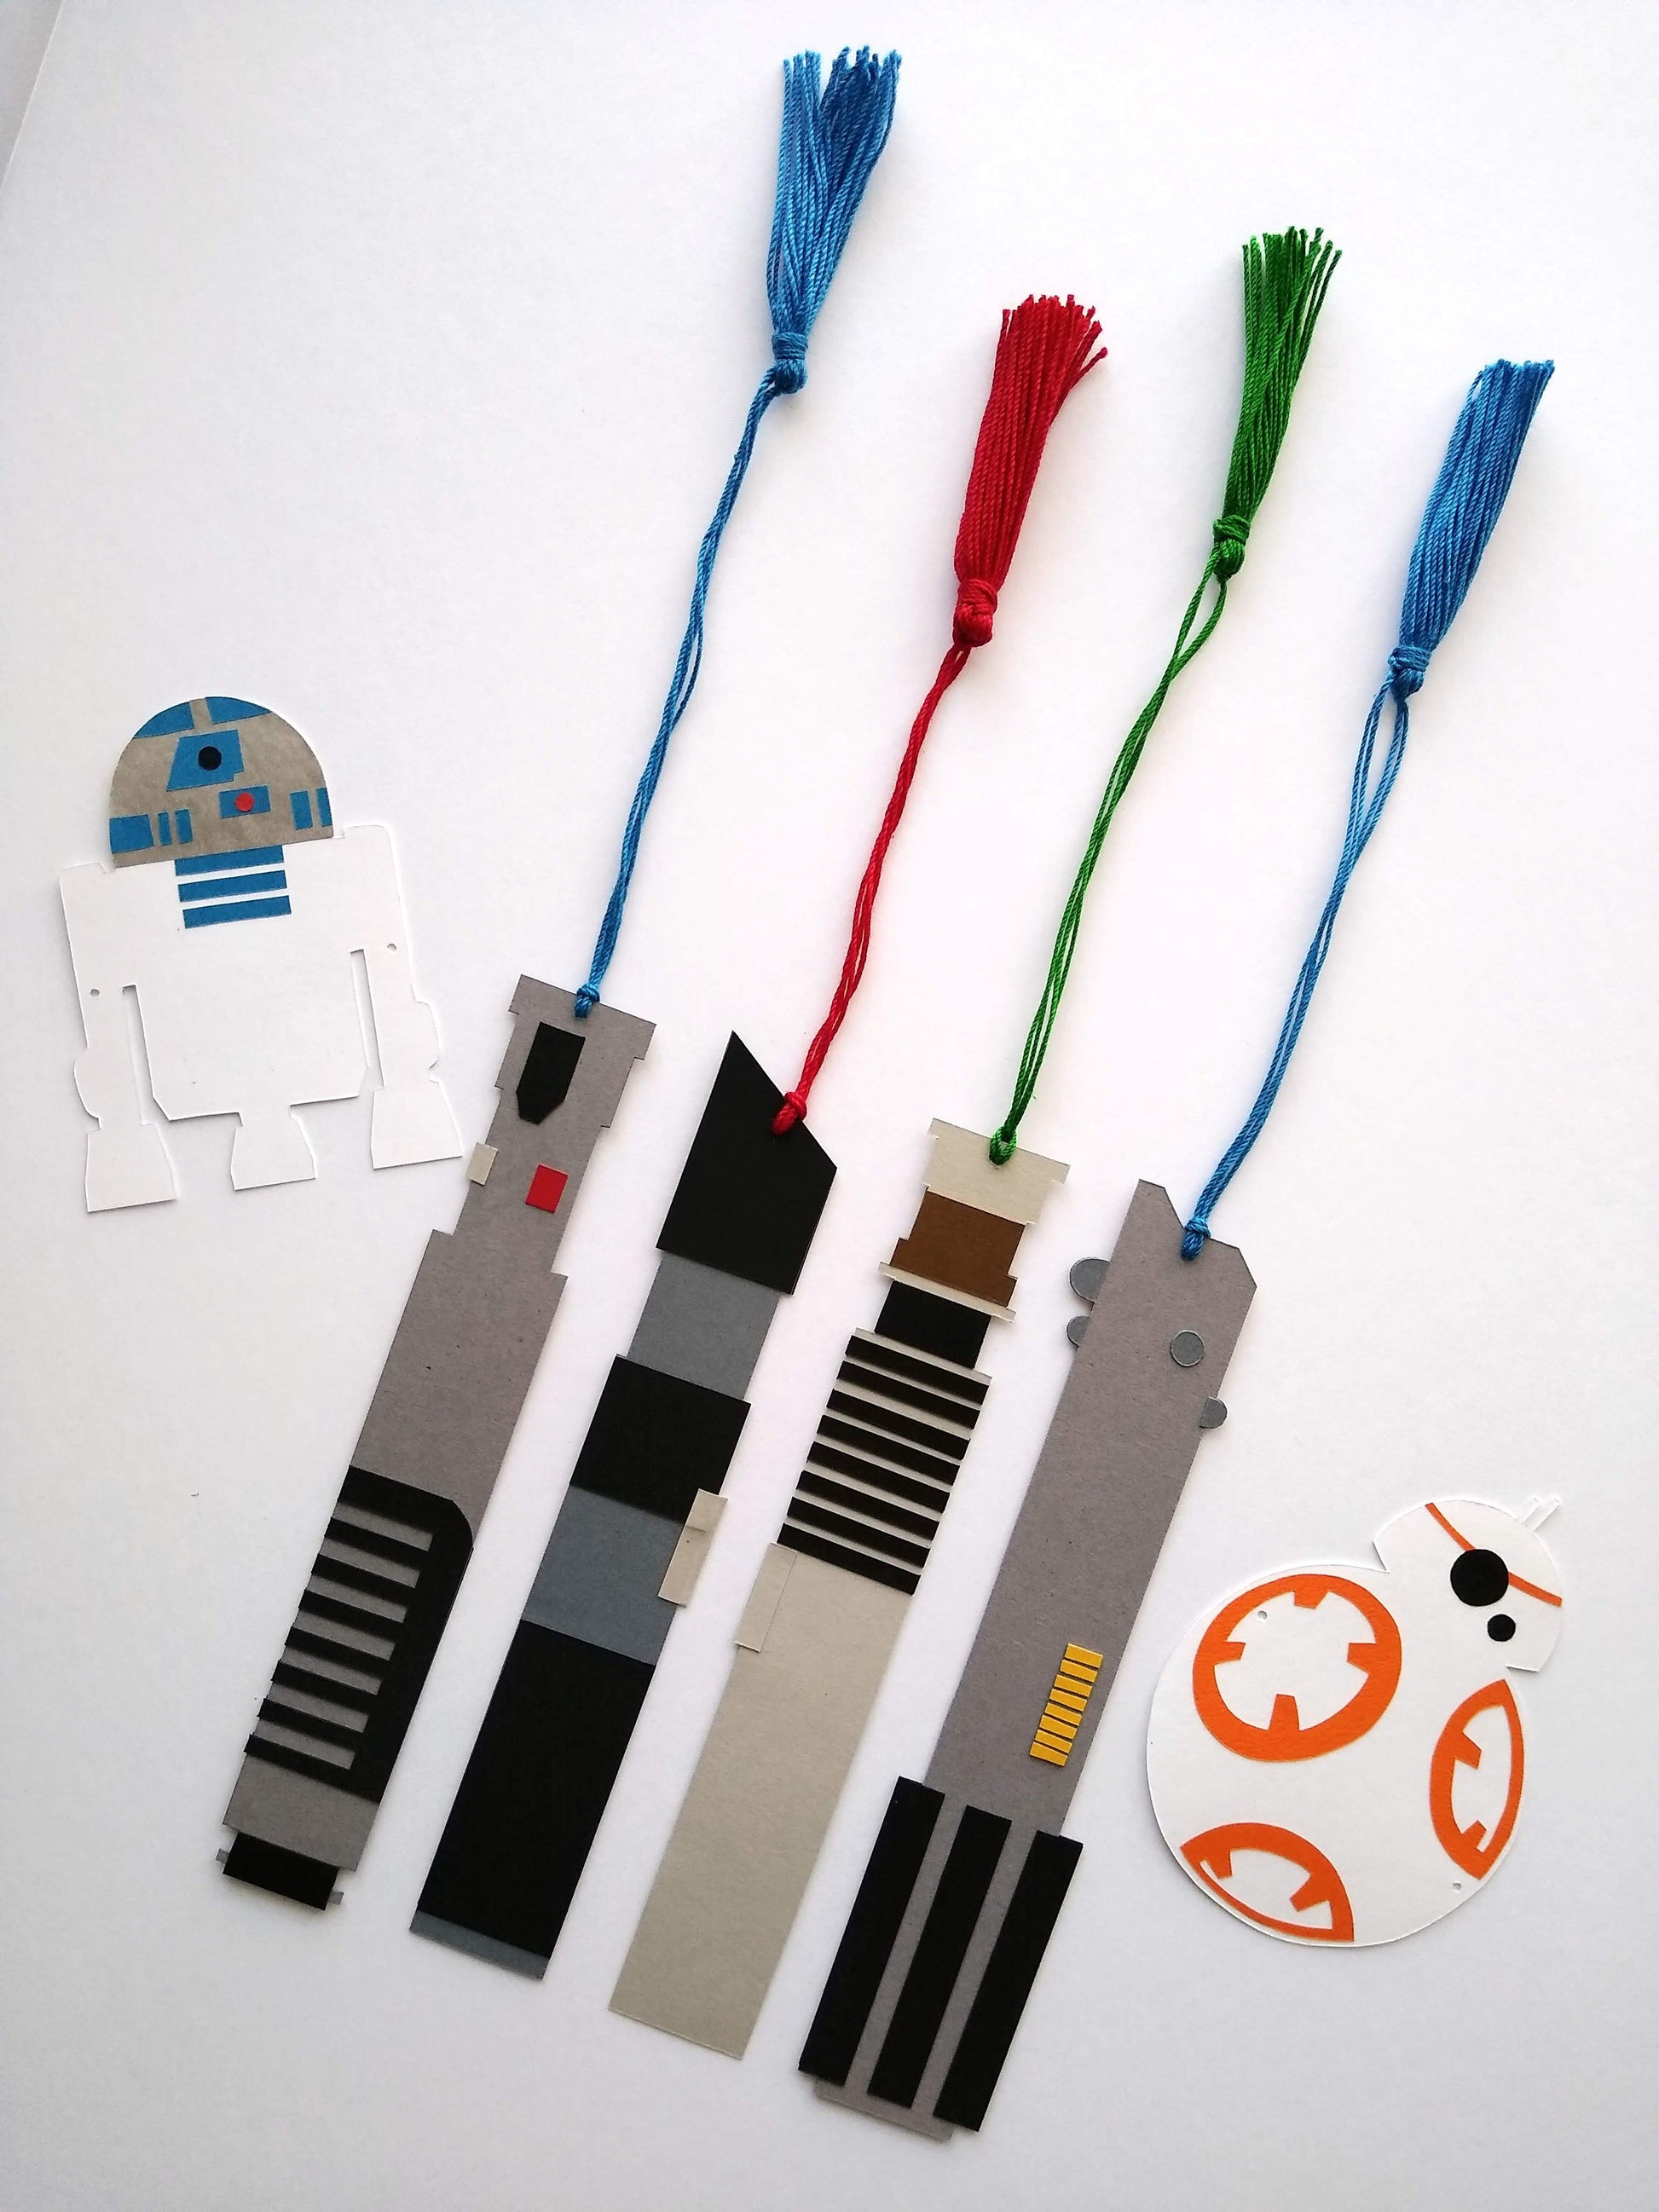 Four bookmarks with tassels stretched out lay on a white background. They rest between a paper R2D2 and BB8. Each bookmark is designed to look like a light saber from Star Wars, with the light portion represented by a colored tassel.